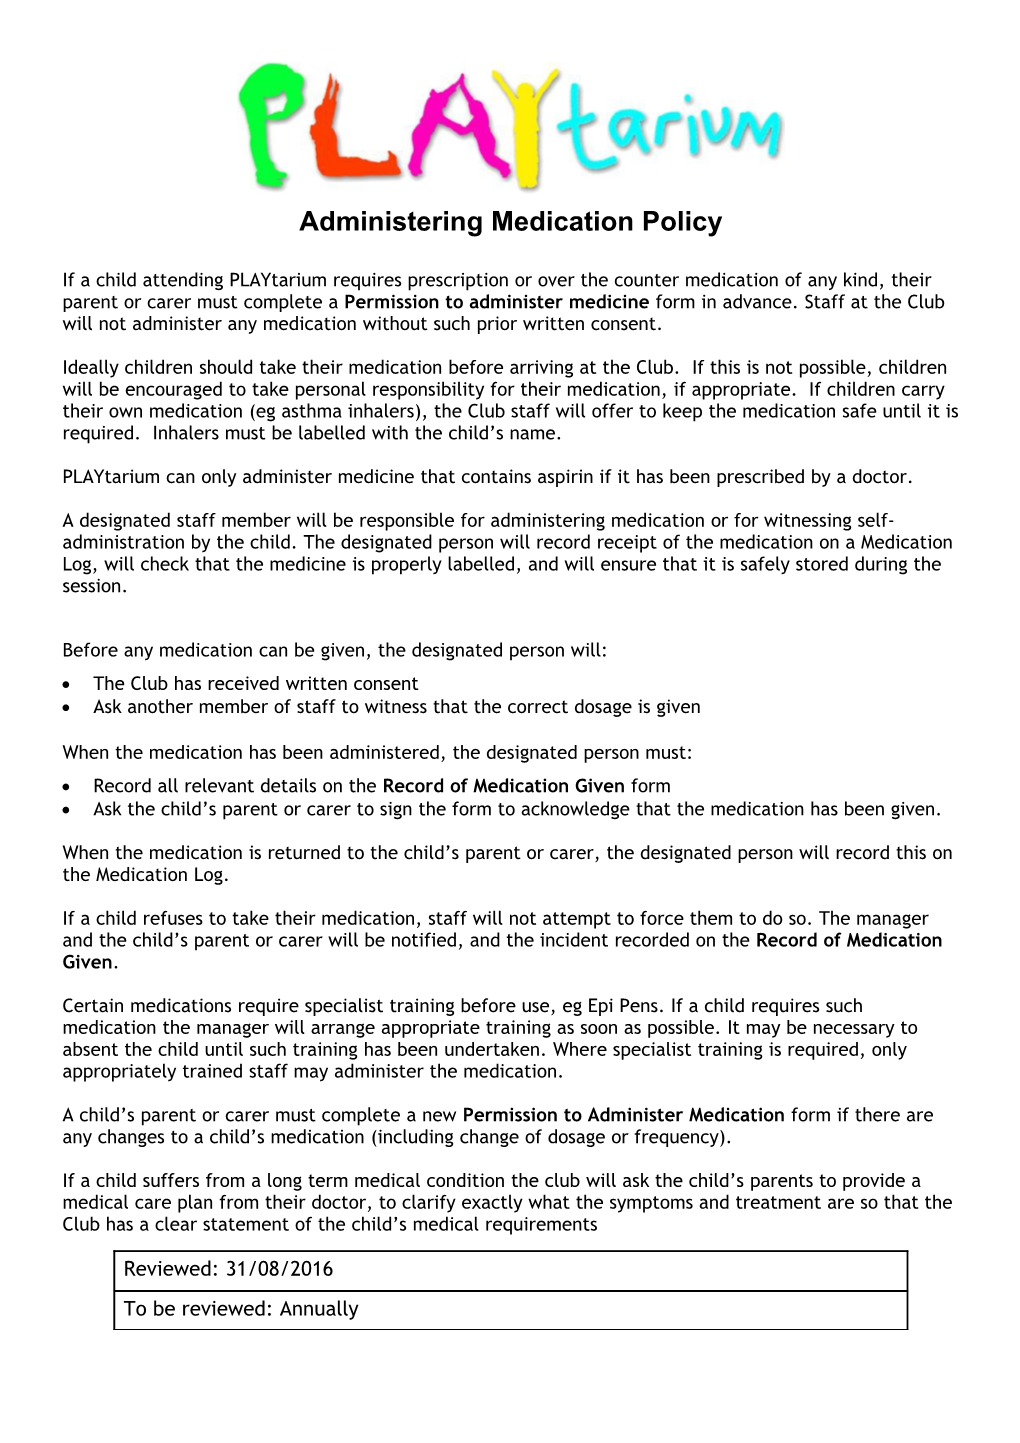 Administering Medication Policy